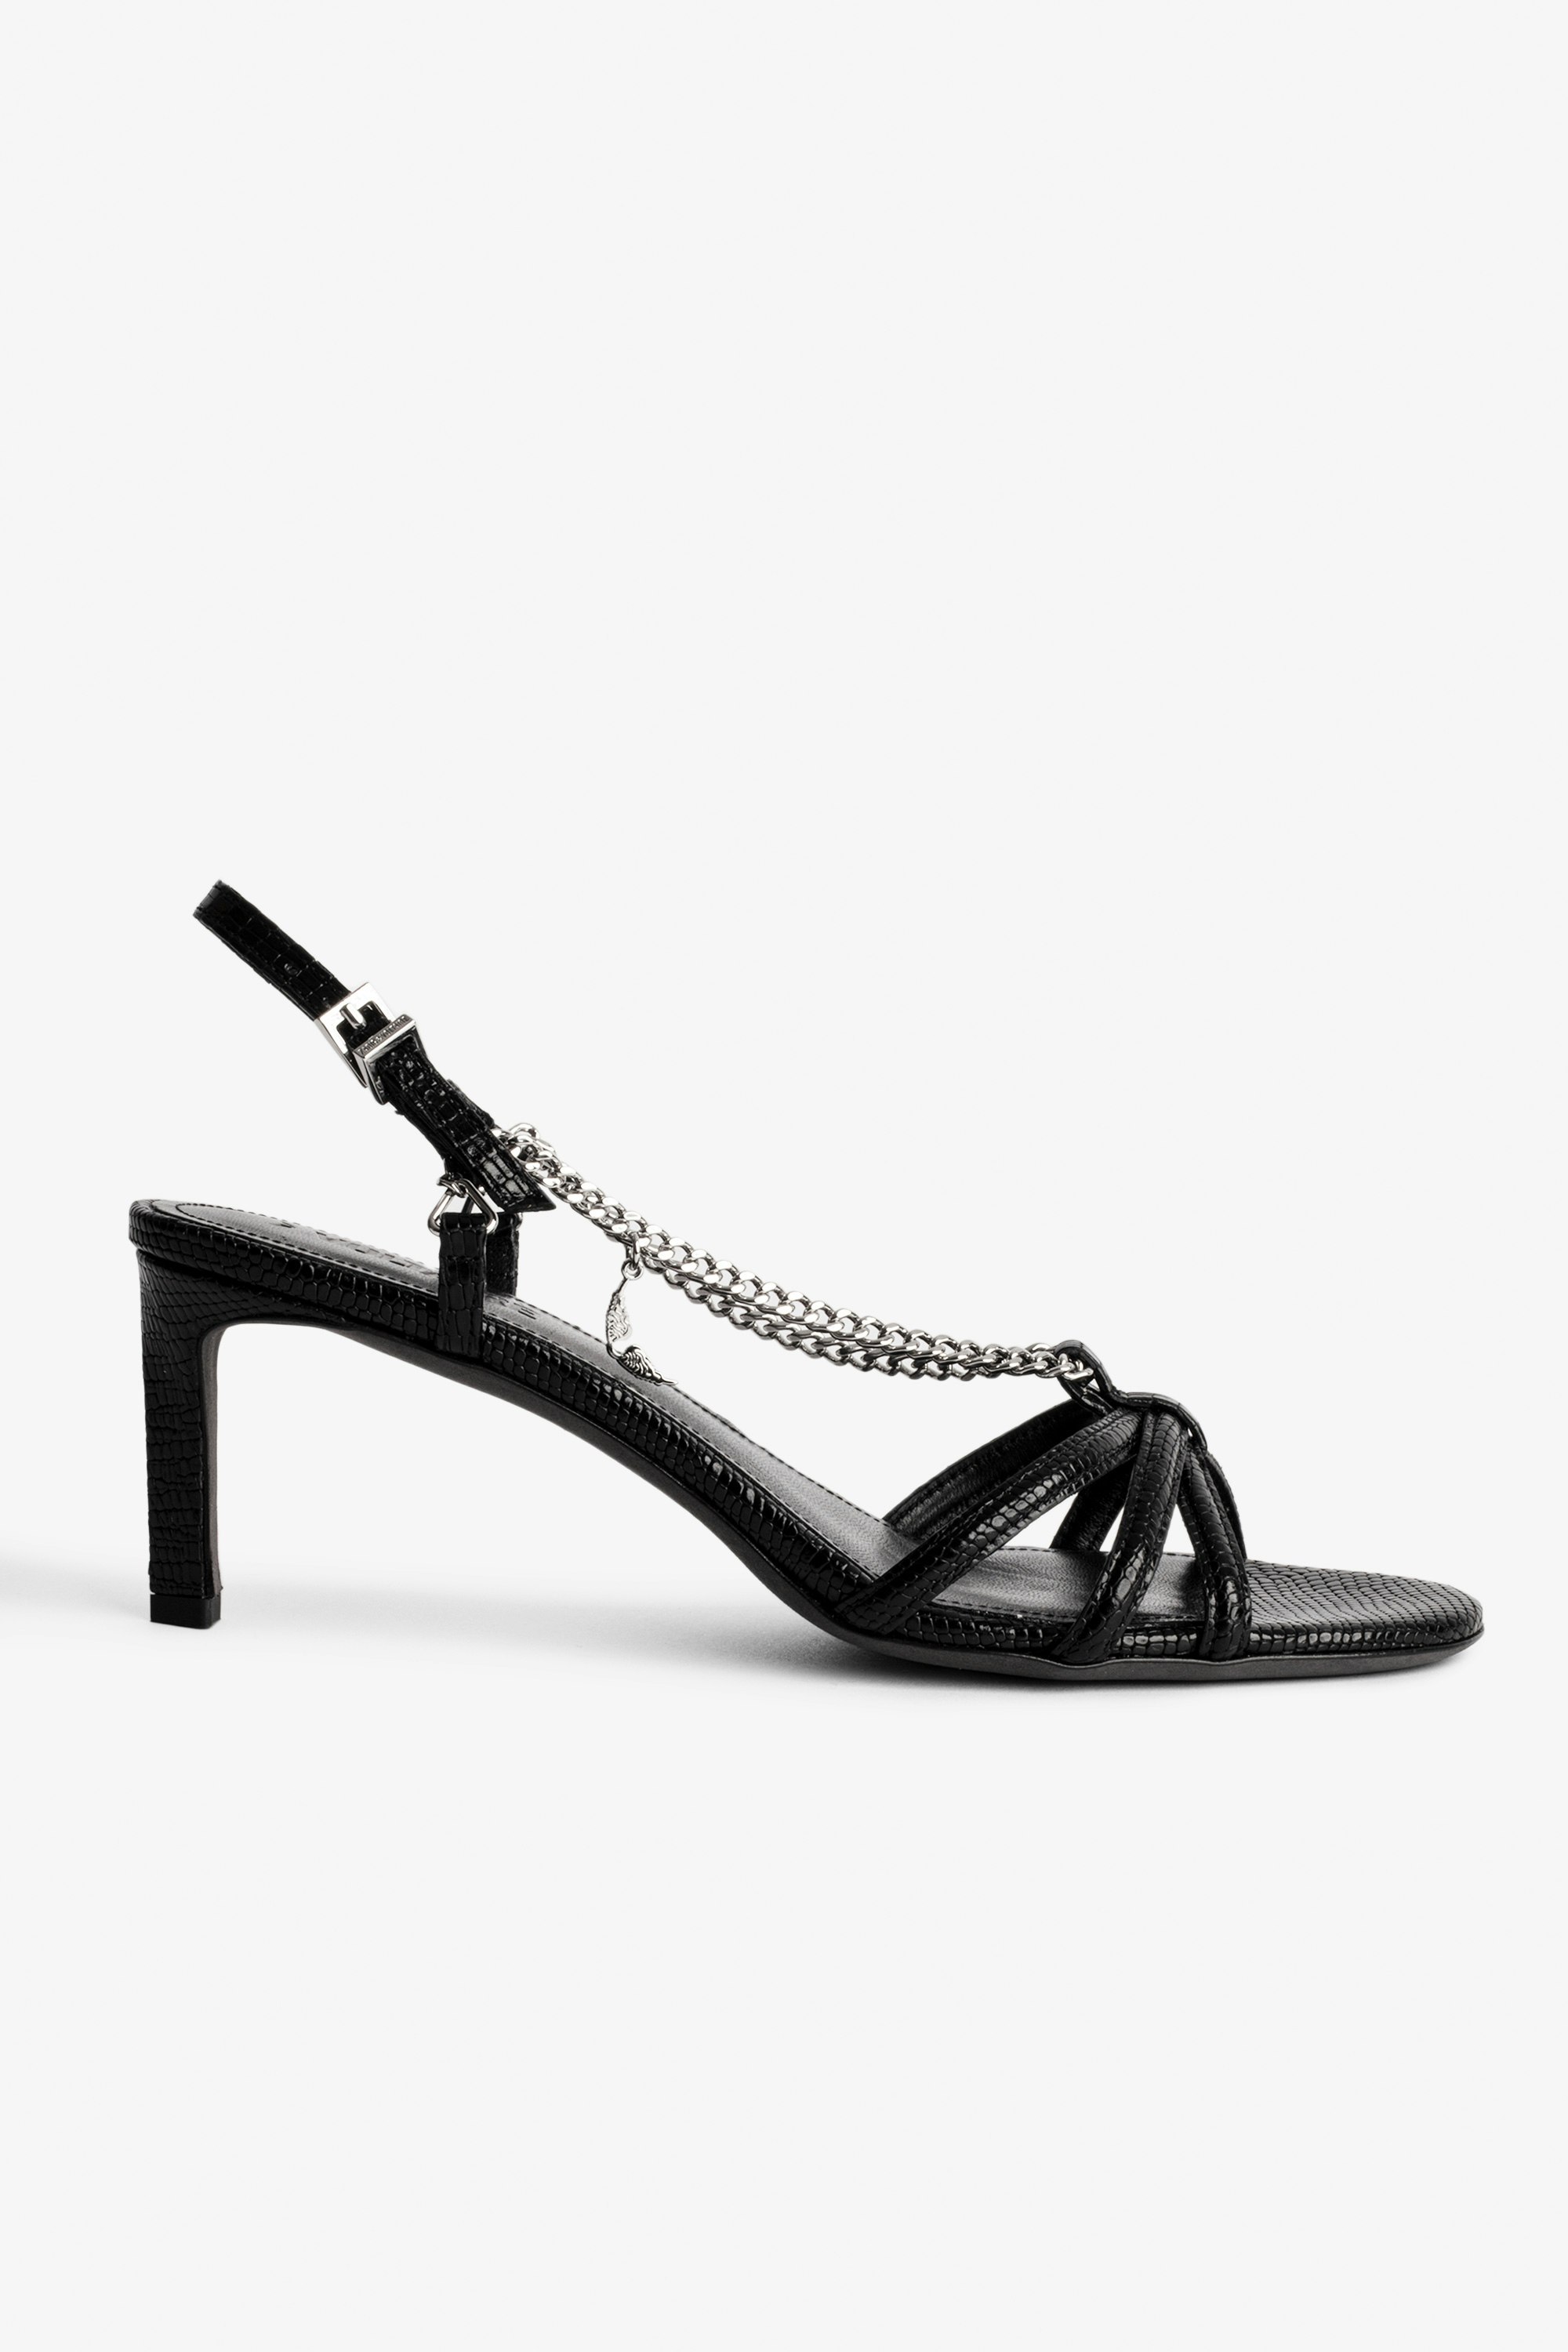 Sleepless Sandals Women’s black embossed leather sandals with straps and chains